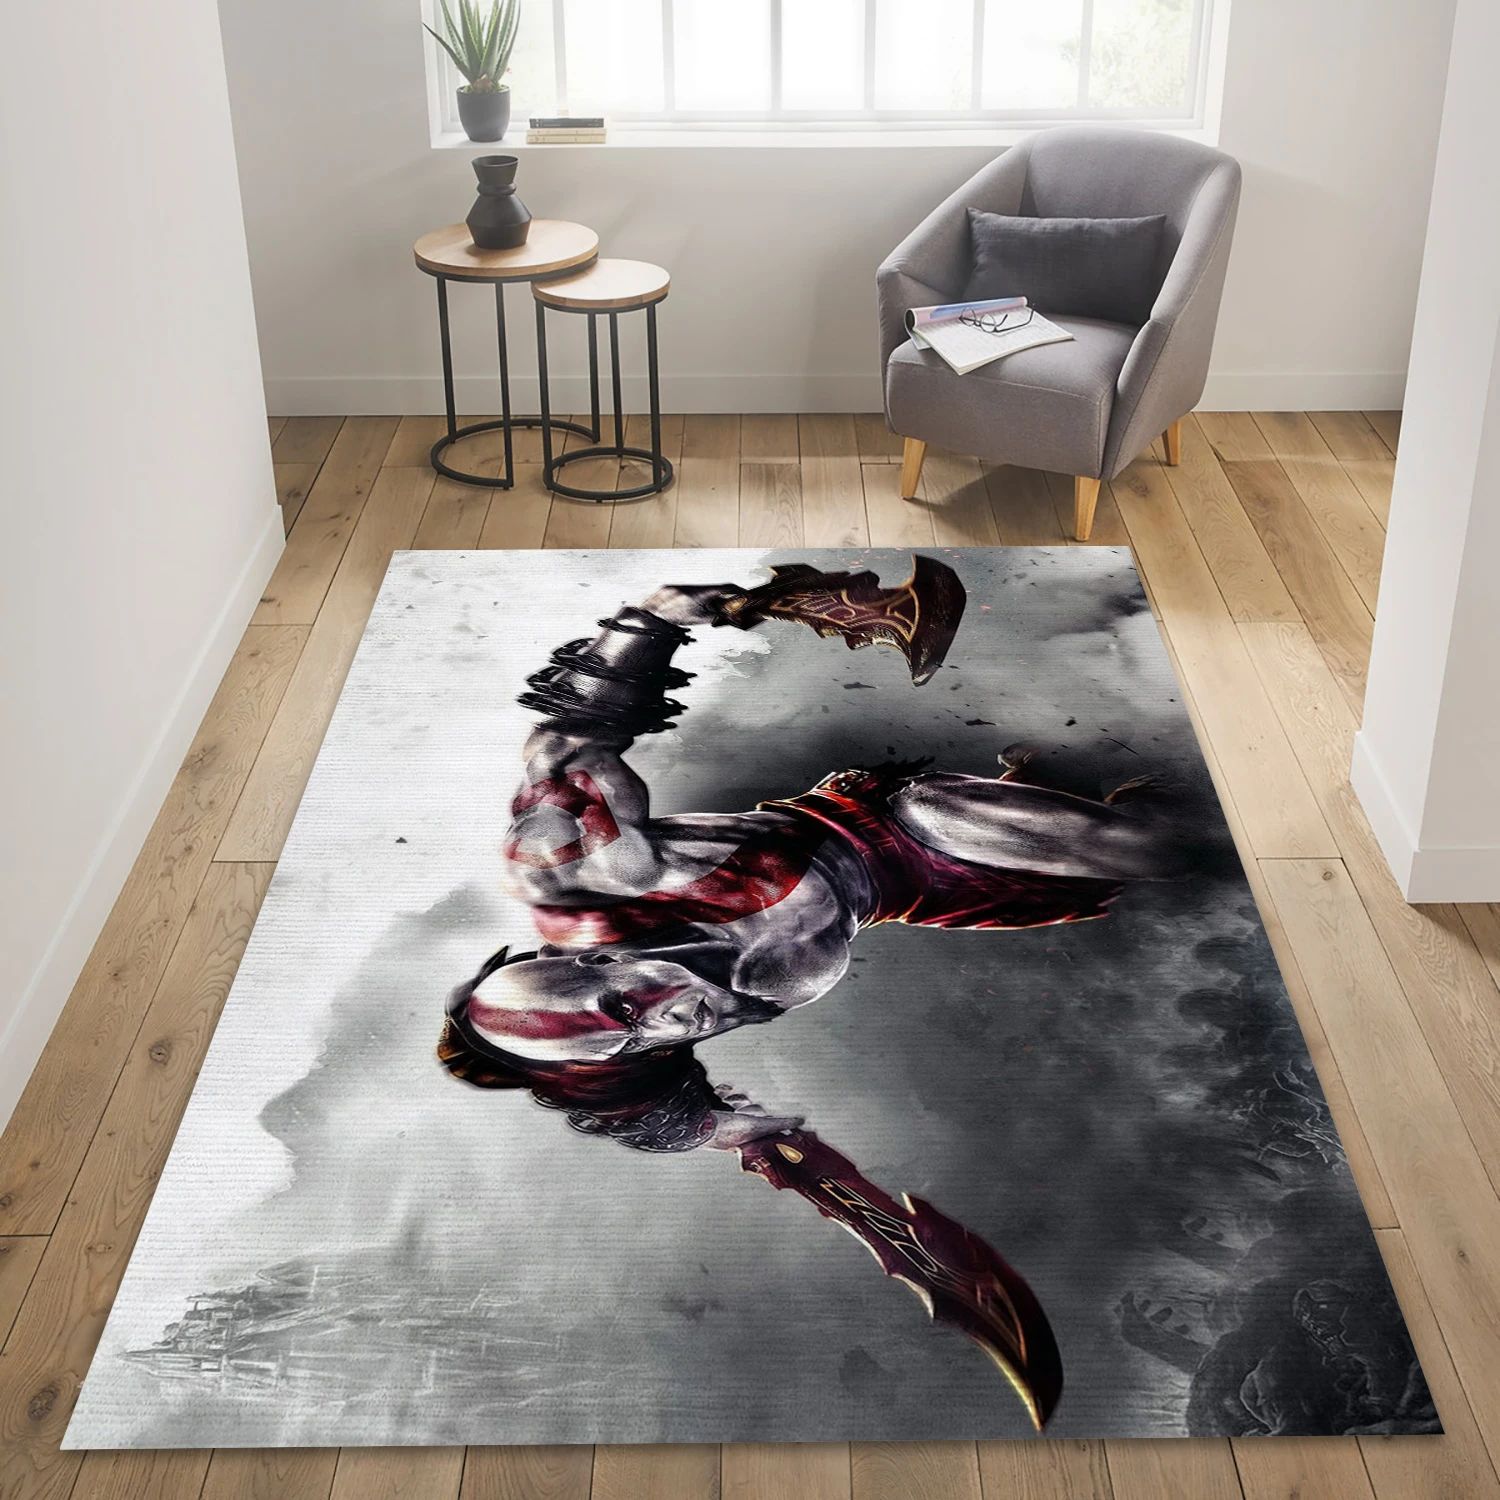 God Of War Video Game Area Rug For Christmas, Area Rug - Home Decor Floor Decor - Indoor Outdoor Rugs